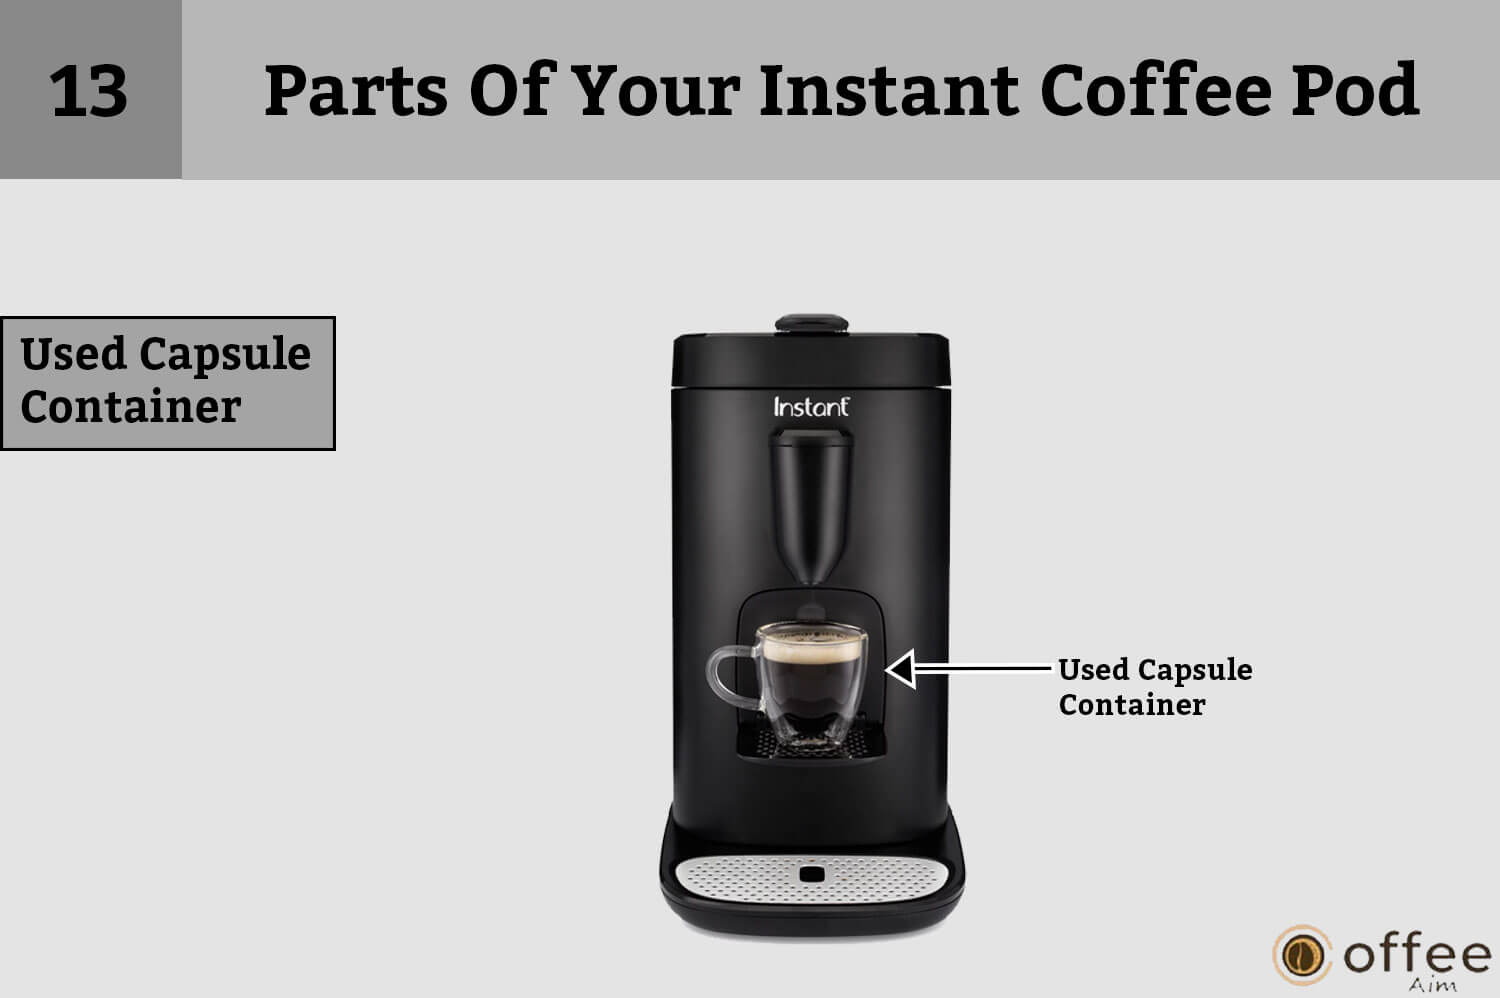 This image depicts the "Used Capsule Container" as part of our article on "How to Connect the Nespresso Vertuo Creatista Machine."